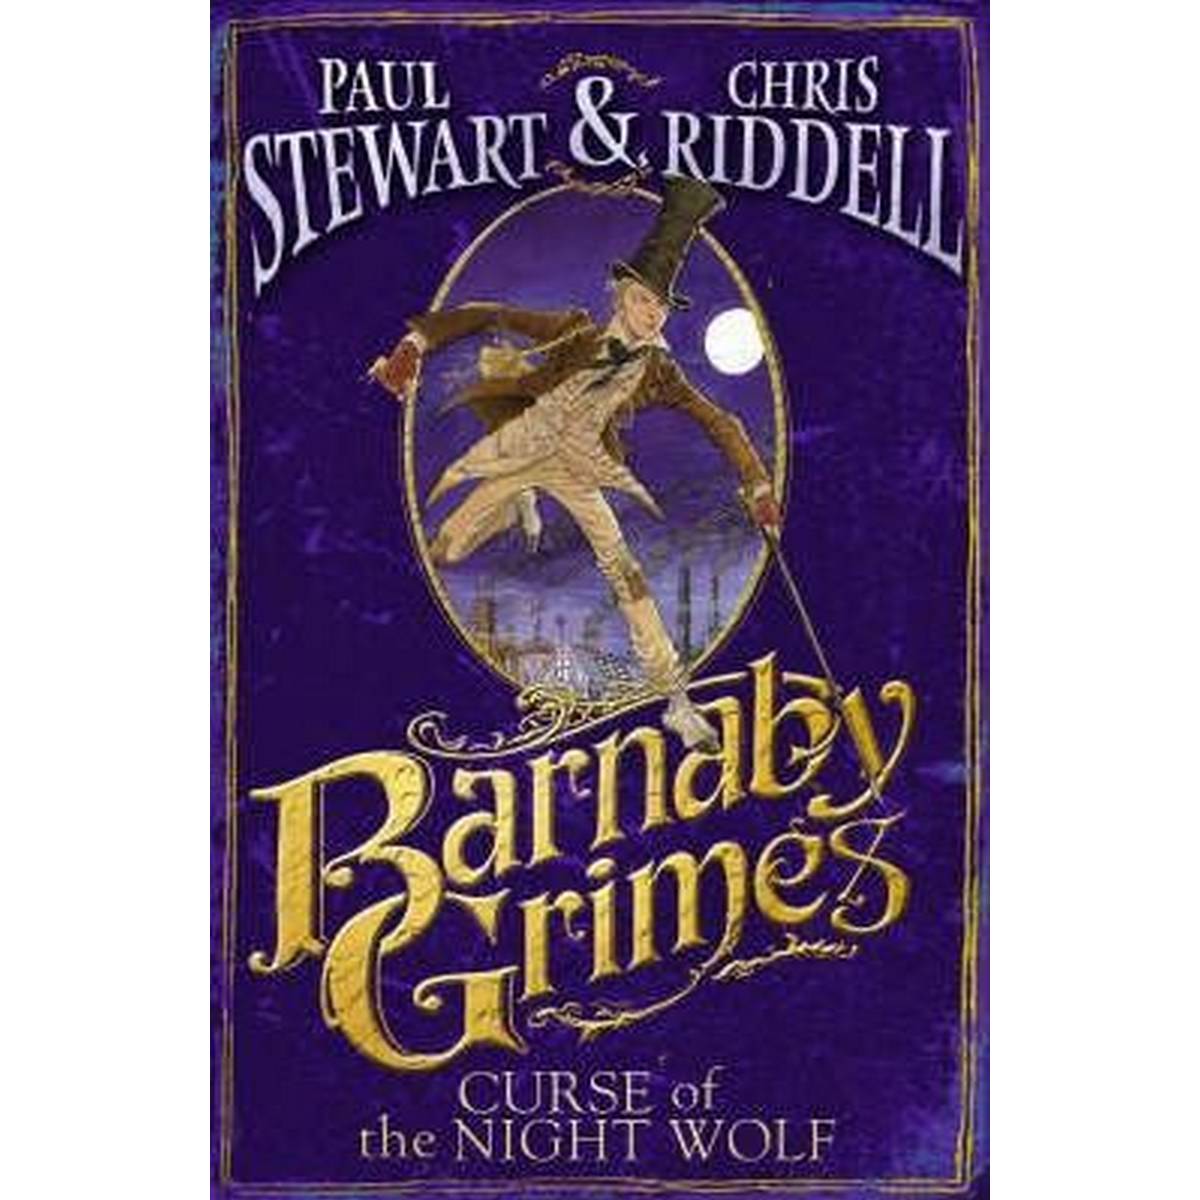 Barnaby Grimes: Curse of the Nightwolf